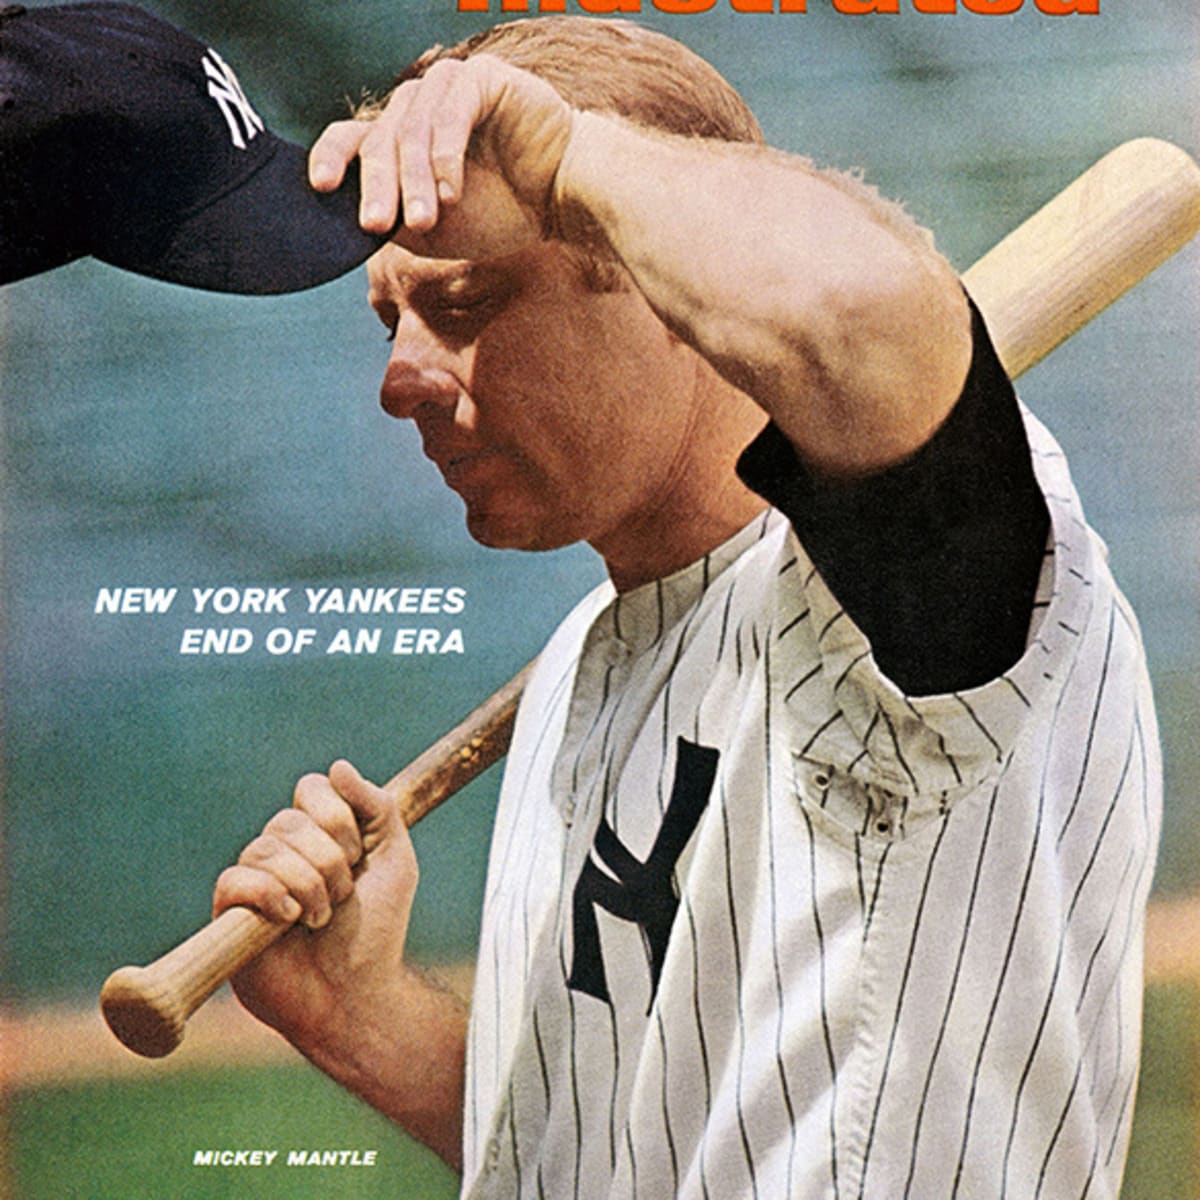 April 12, 1965 Table Of Contents - Sports Illustrated Vault